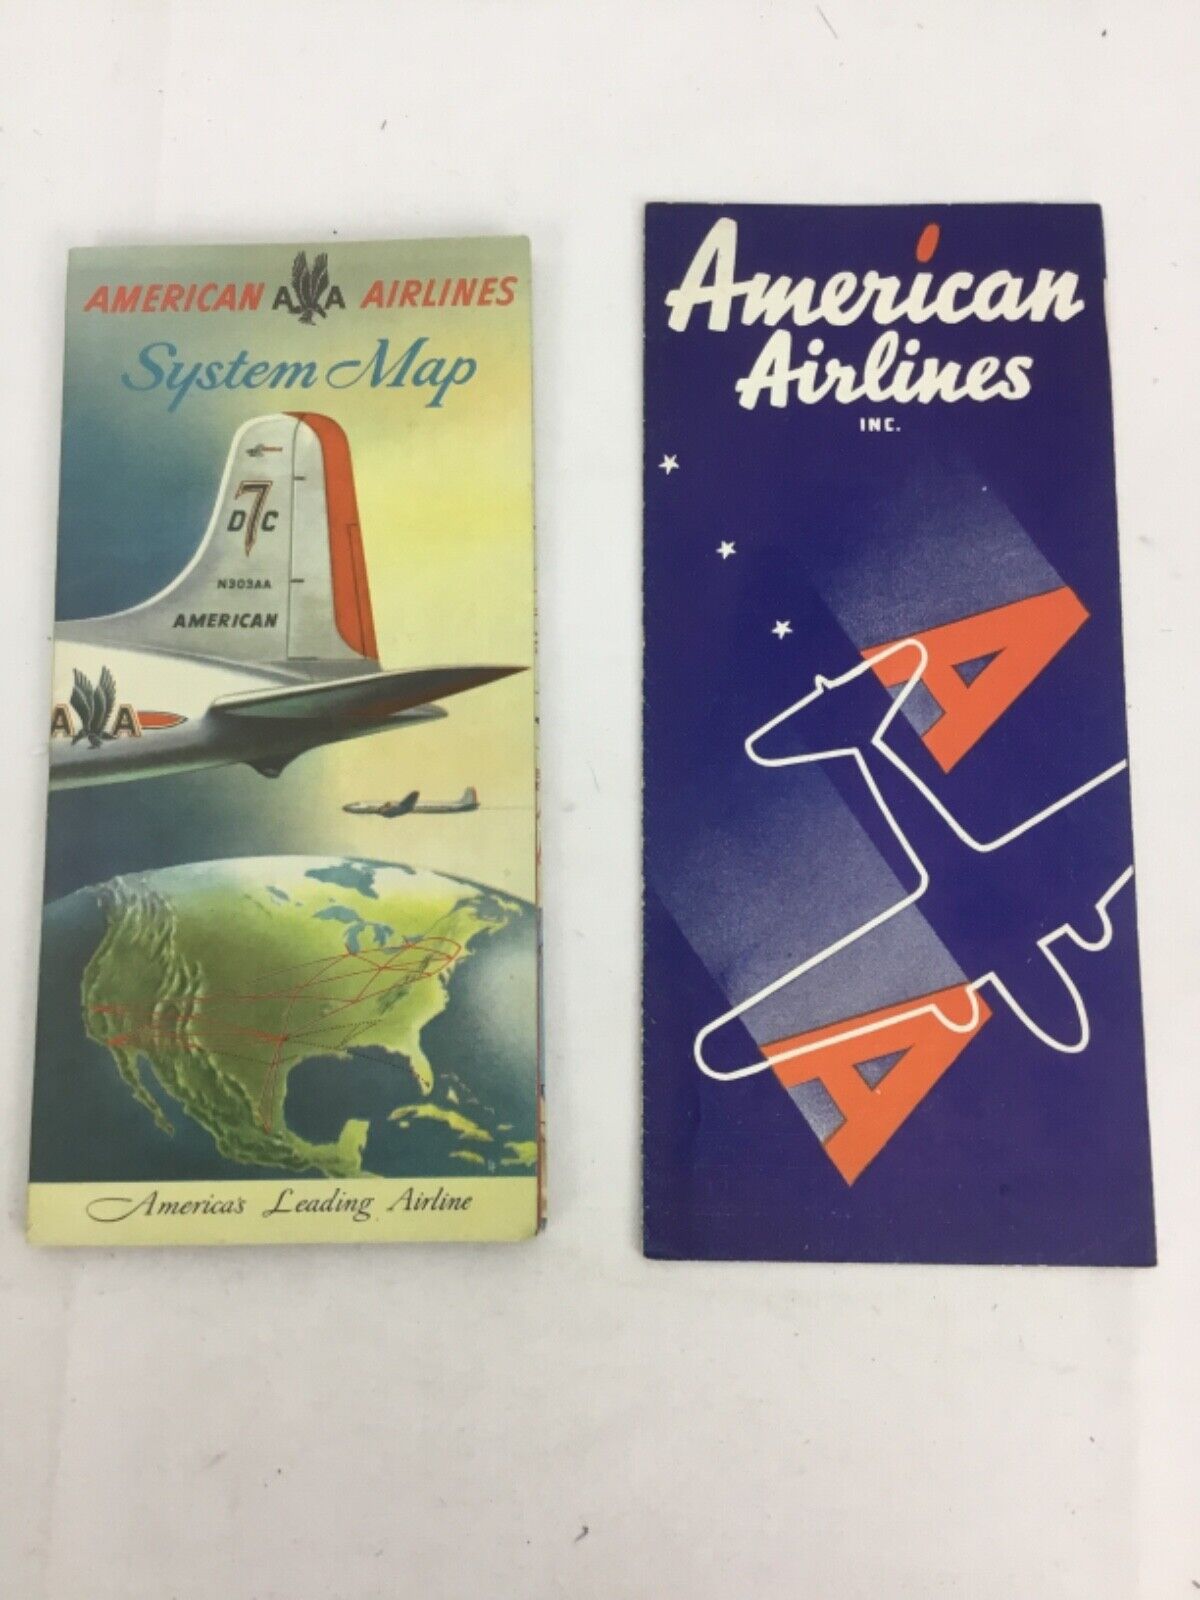 AMERICAN AIR LINES JAN. 1, 1936 TIMETABLE PLUS 1959’S SYSTEM MAP